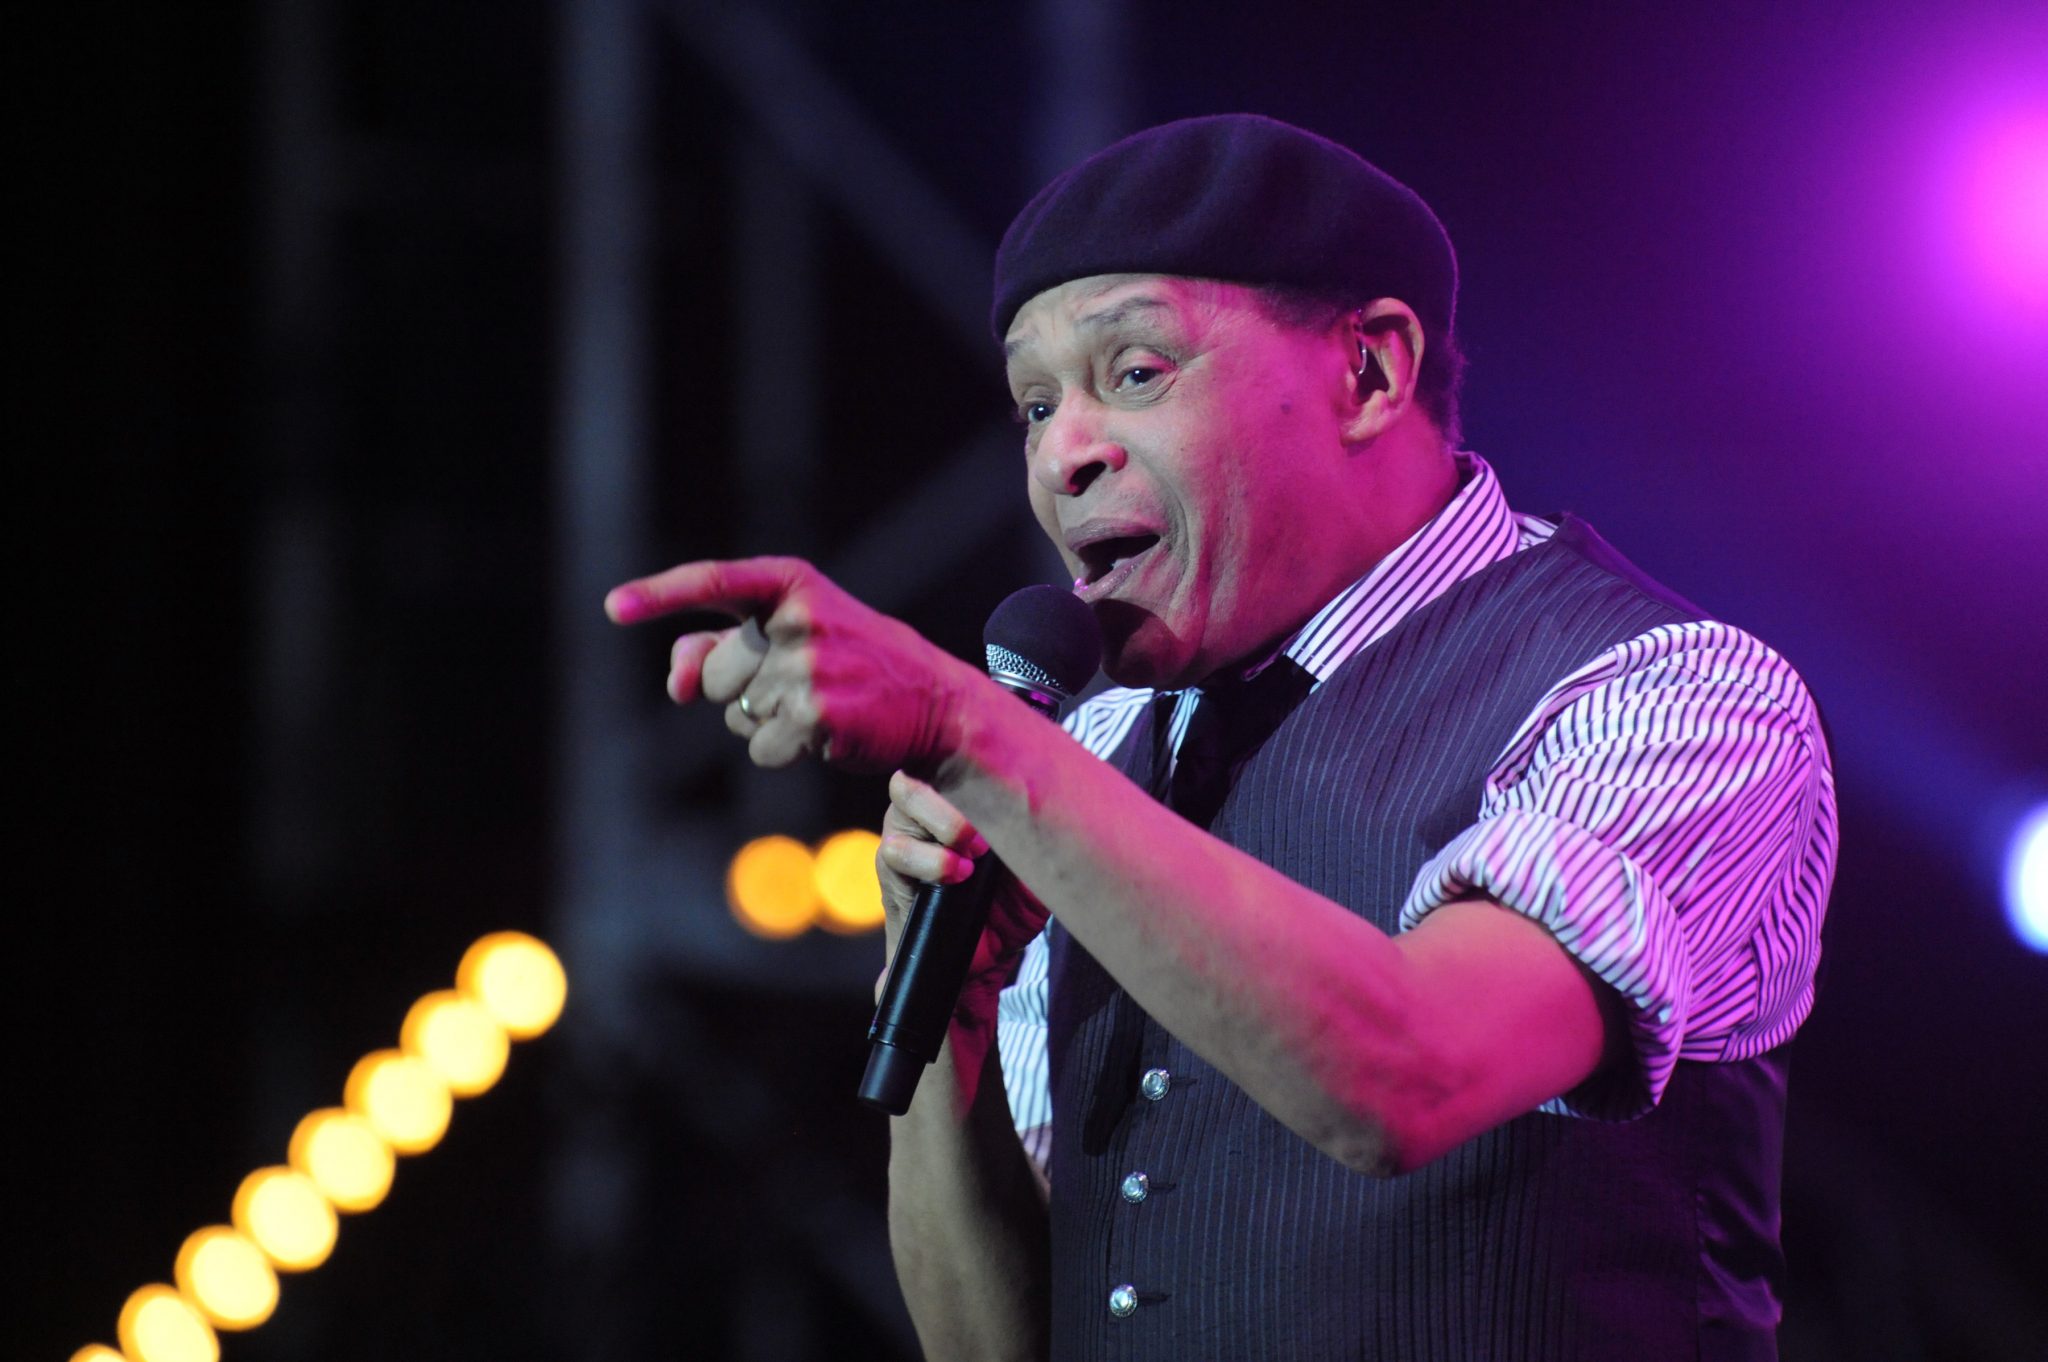 (FILES) This file photo taken on May 21, 2010 shows American singer Al Jarreau performing during the ninth edition of the Mawazine international music festival in Rabat .  Al Jarreau, famed R&B and jazz singer died on February 12, 2017. / AFP PHOTO / FADEL SENNA